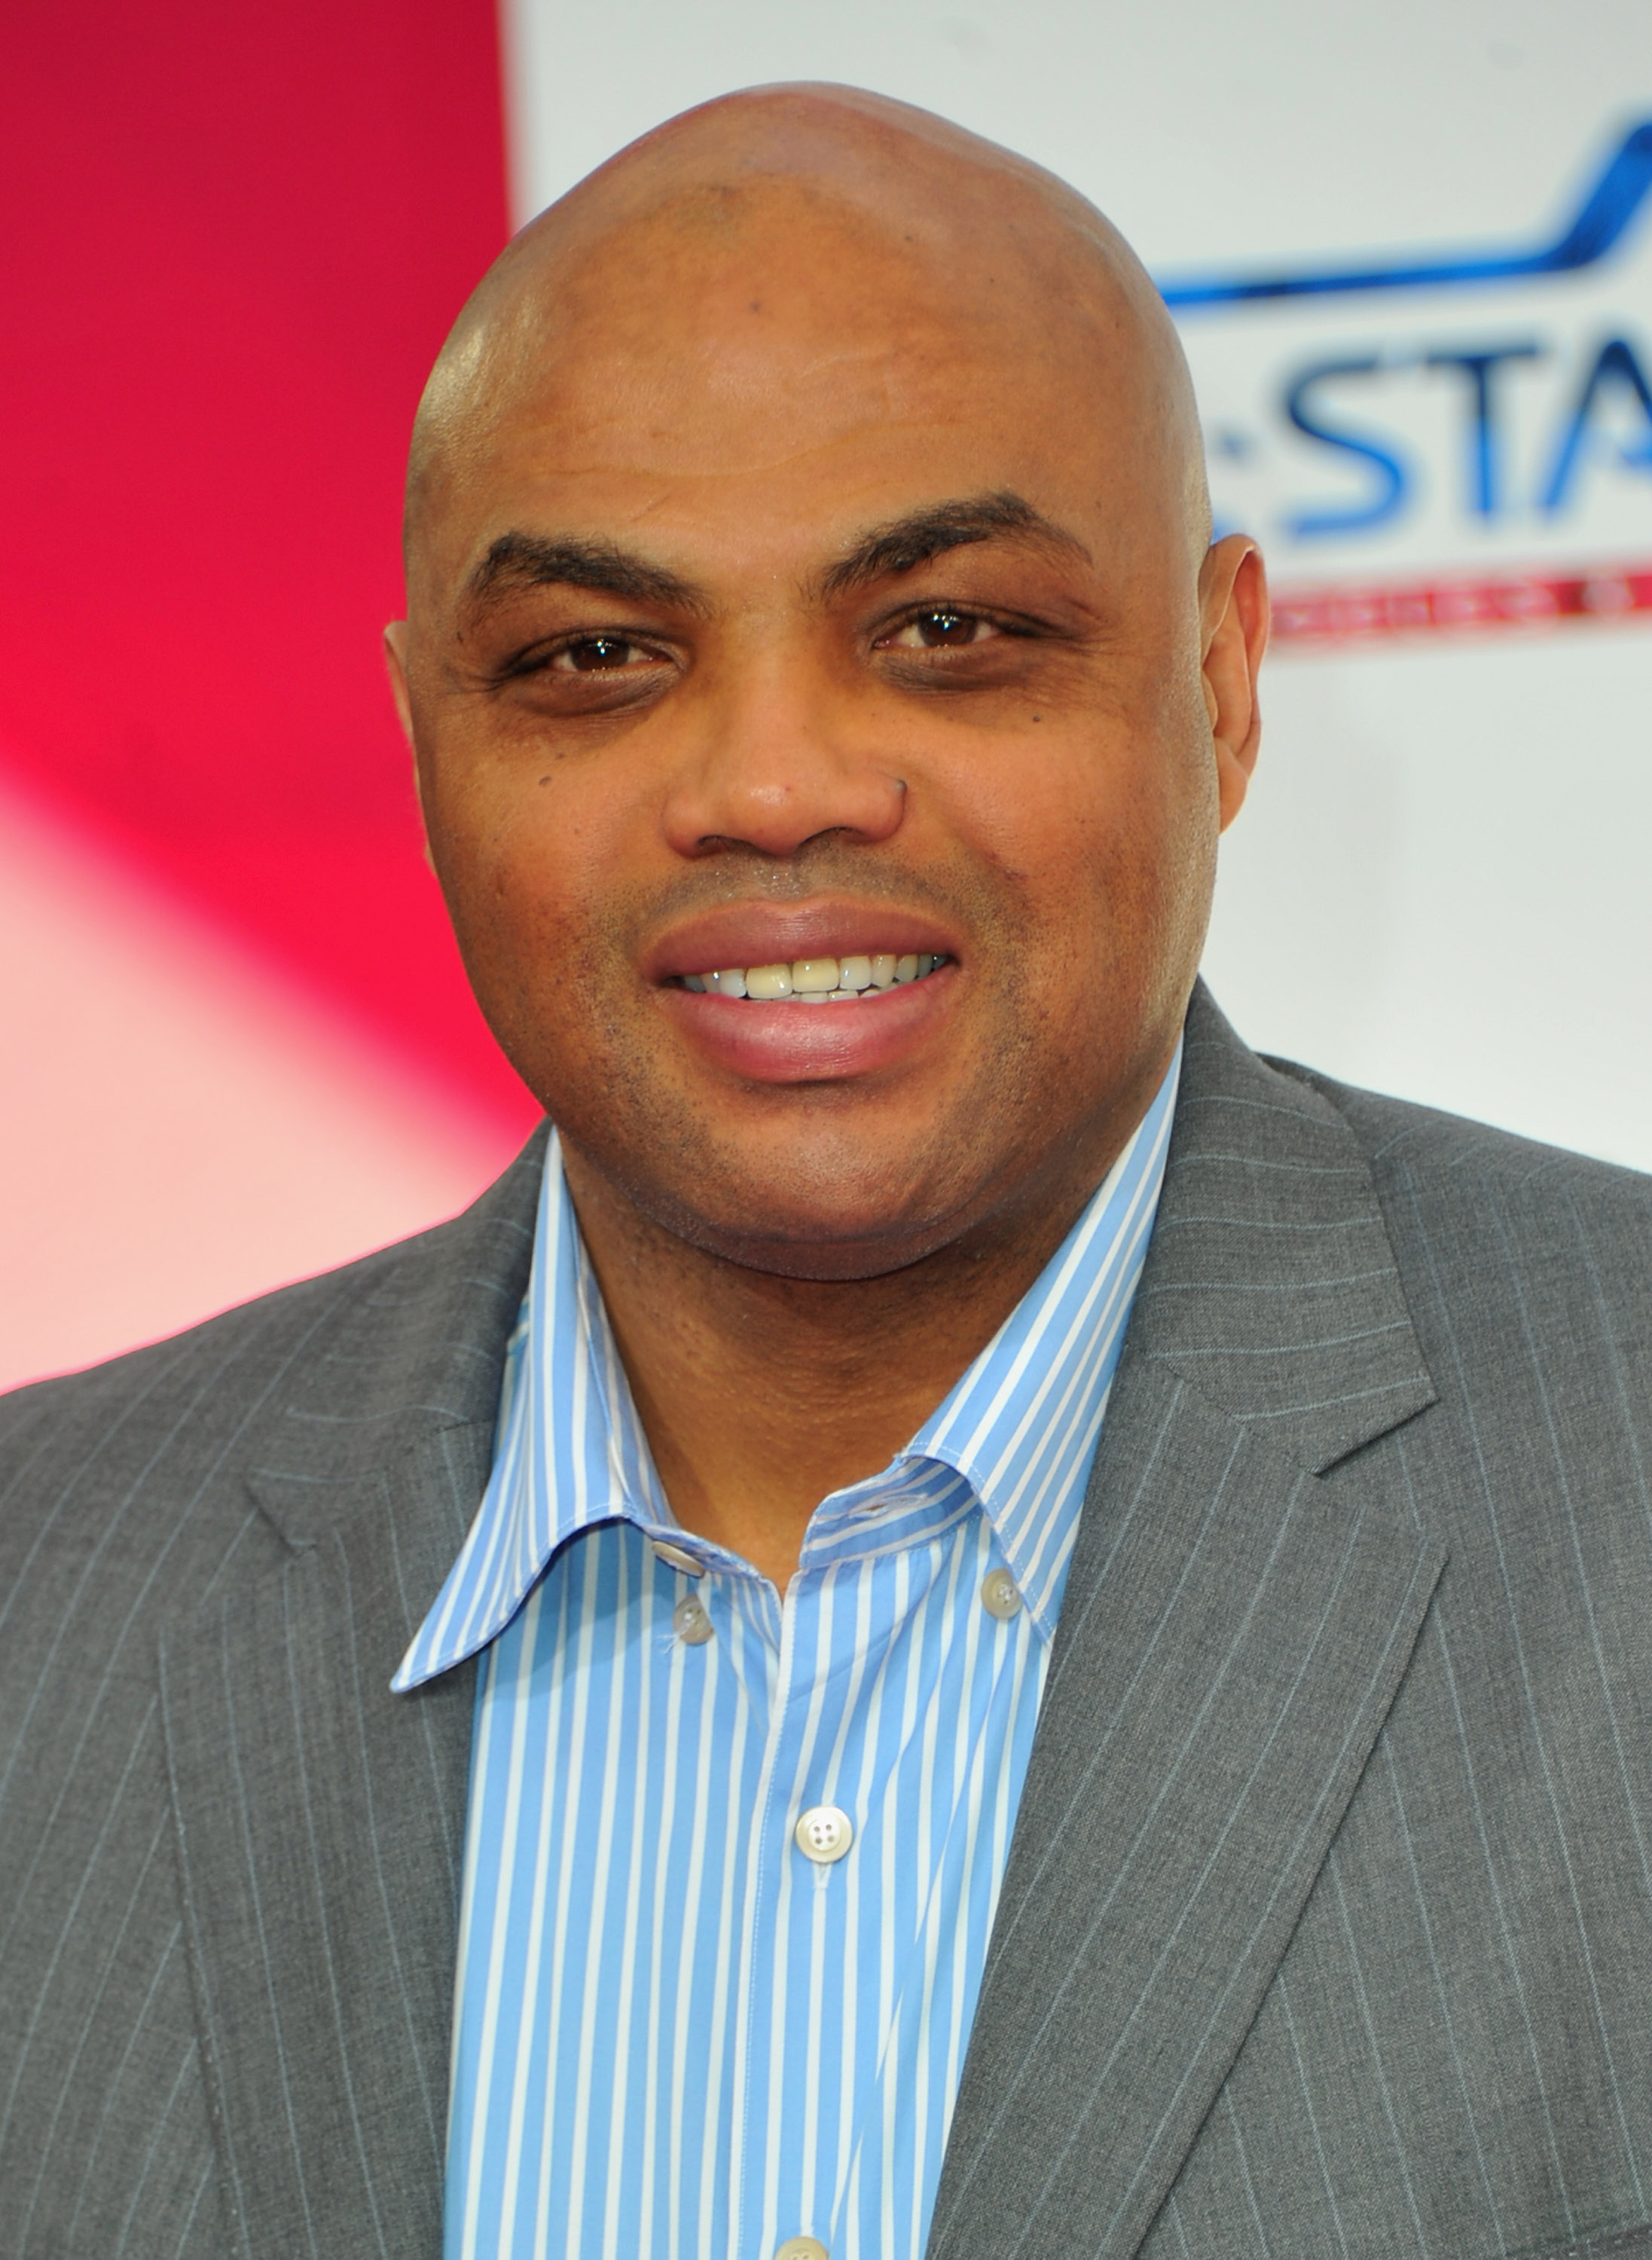 LOS ANGELES, CA - FEBRUARY 20:  Former NBA player Charles Barkley arrives to the T-Mobile Magenta Carpet at the 2011 NBA All-Star Game on February 20, 2011 in Los Angeles, California.  (Photo by Alberto E. Rodriguez/Getty Images)